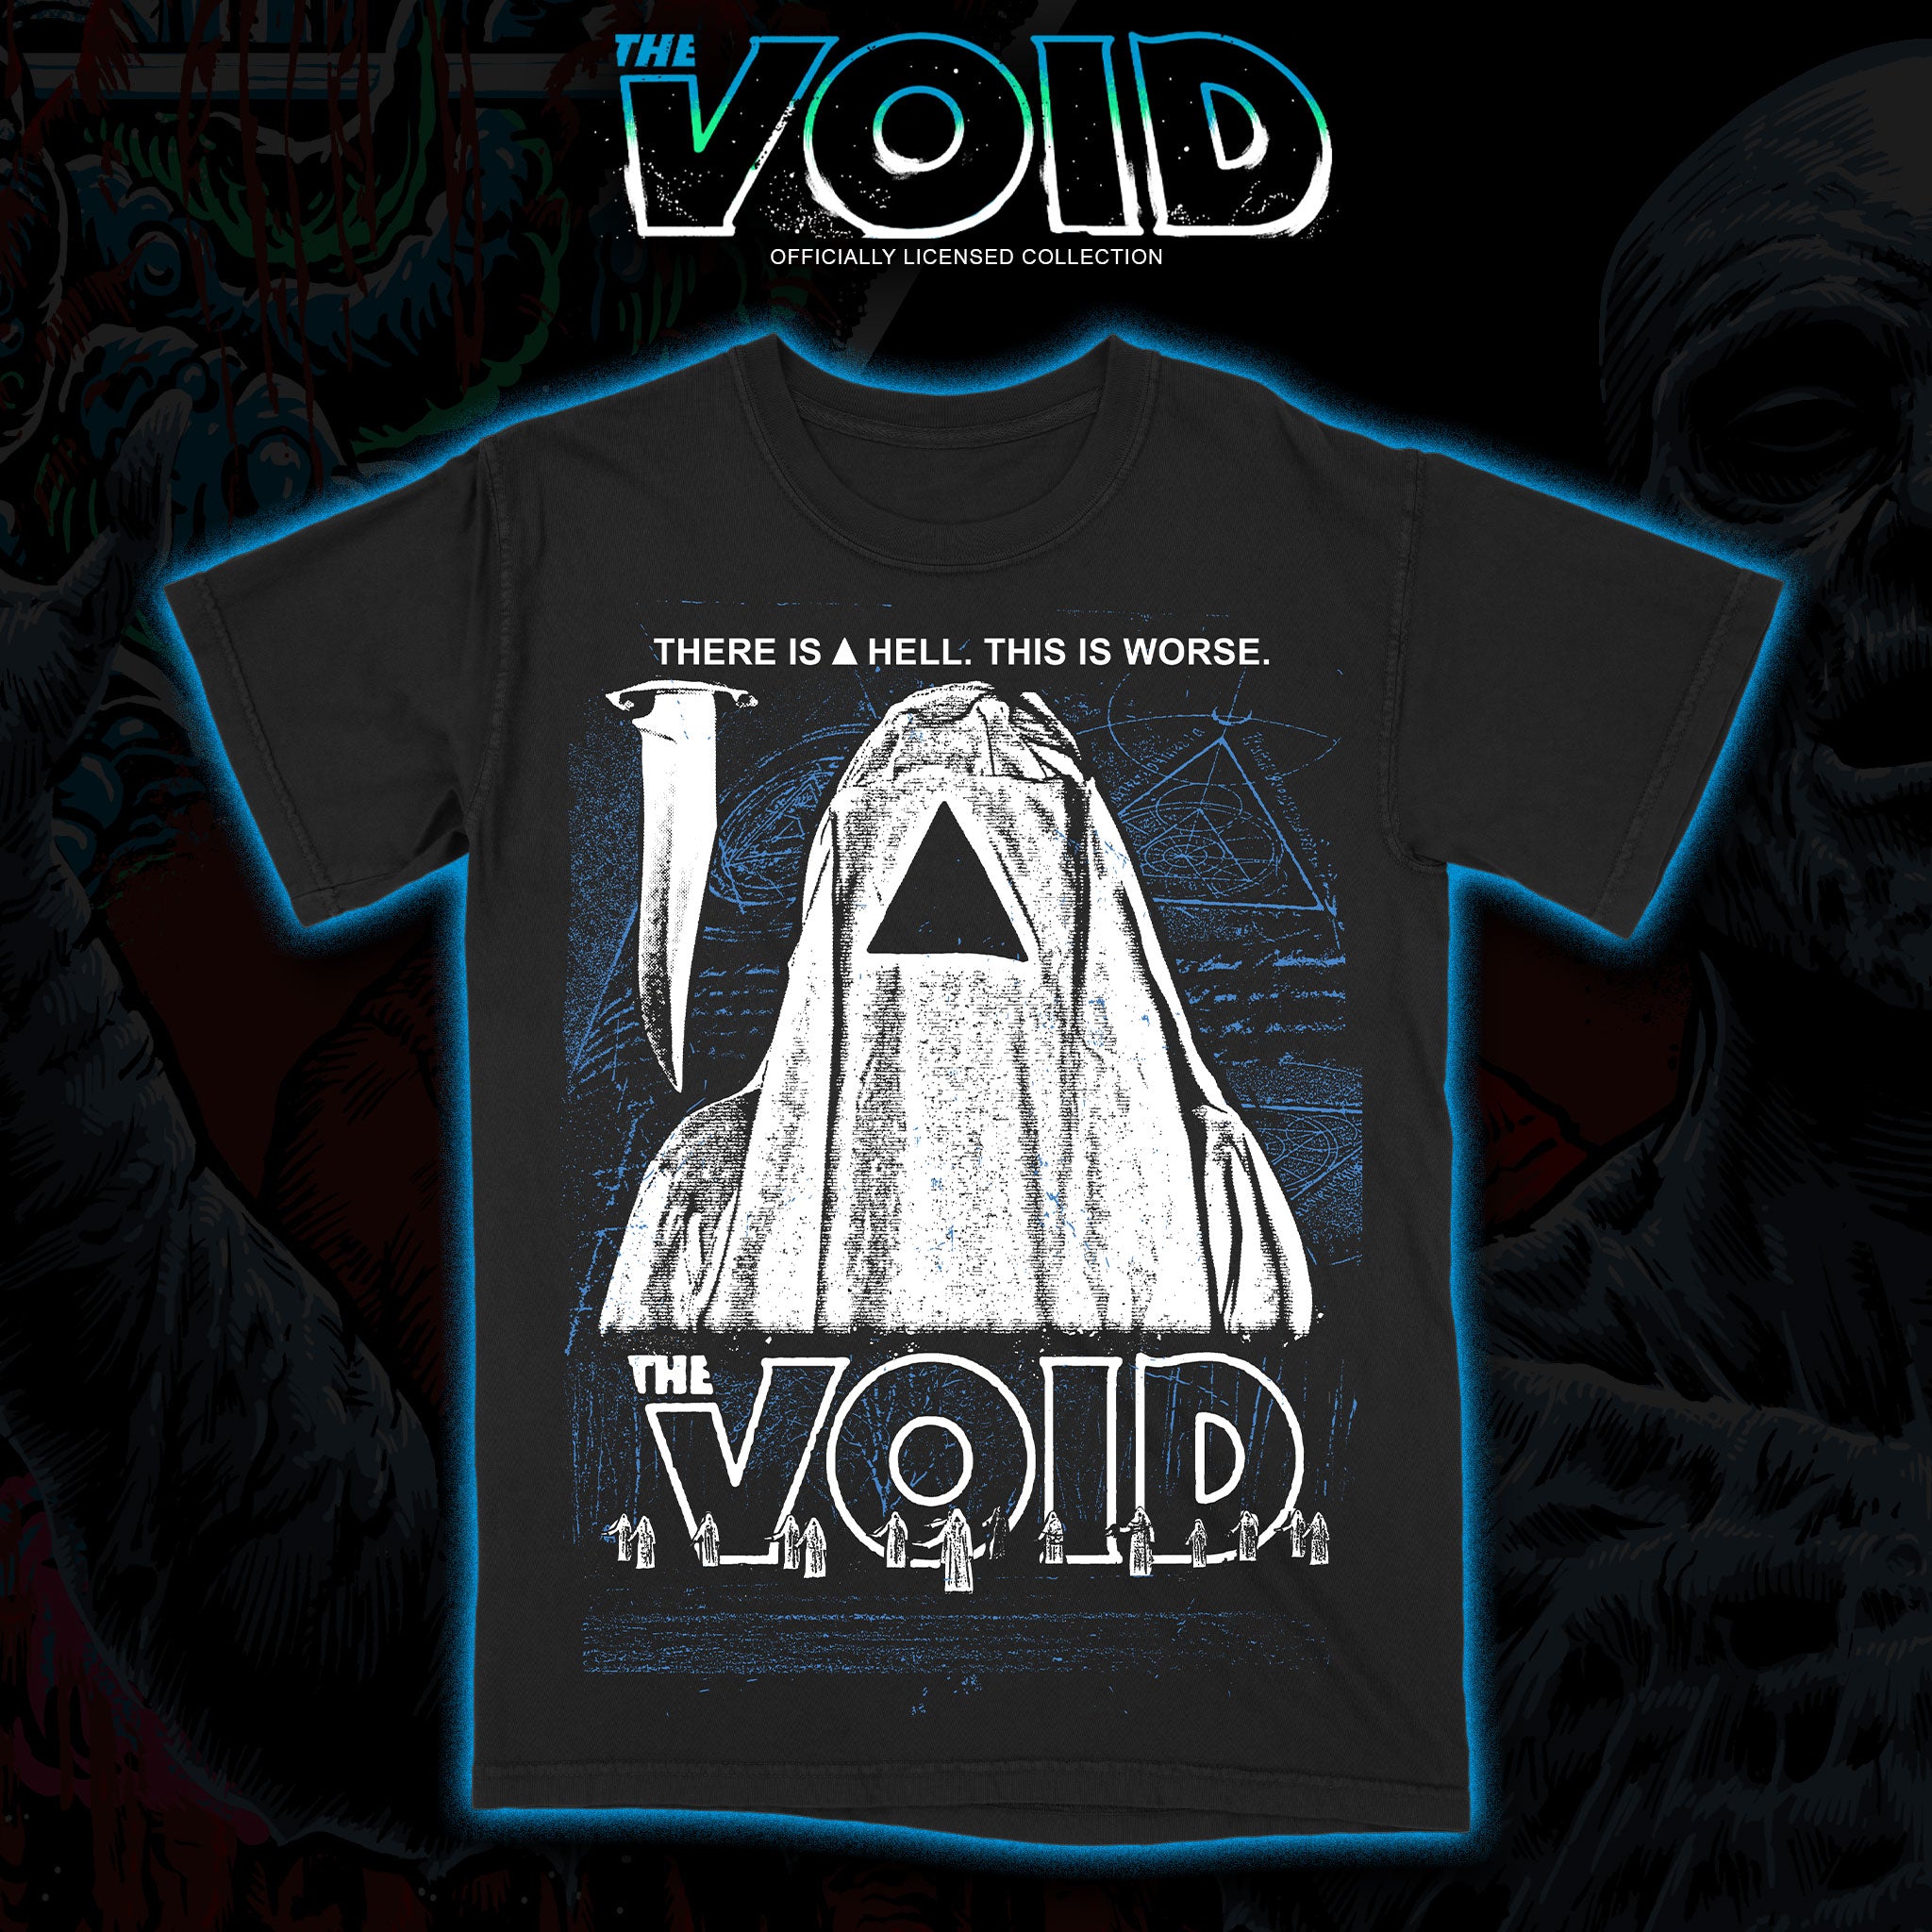 The Void "Join Me" Premium tee